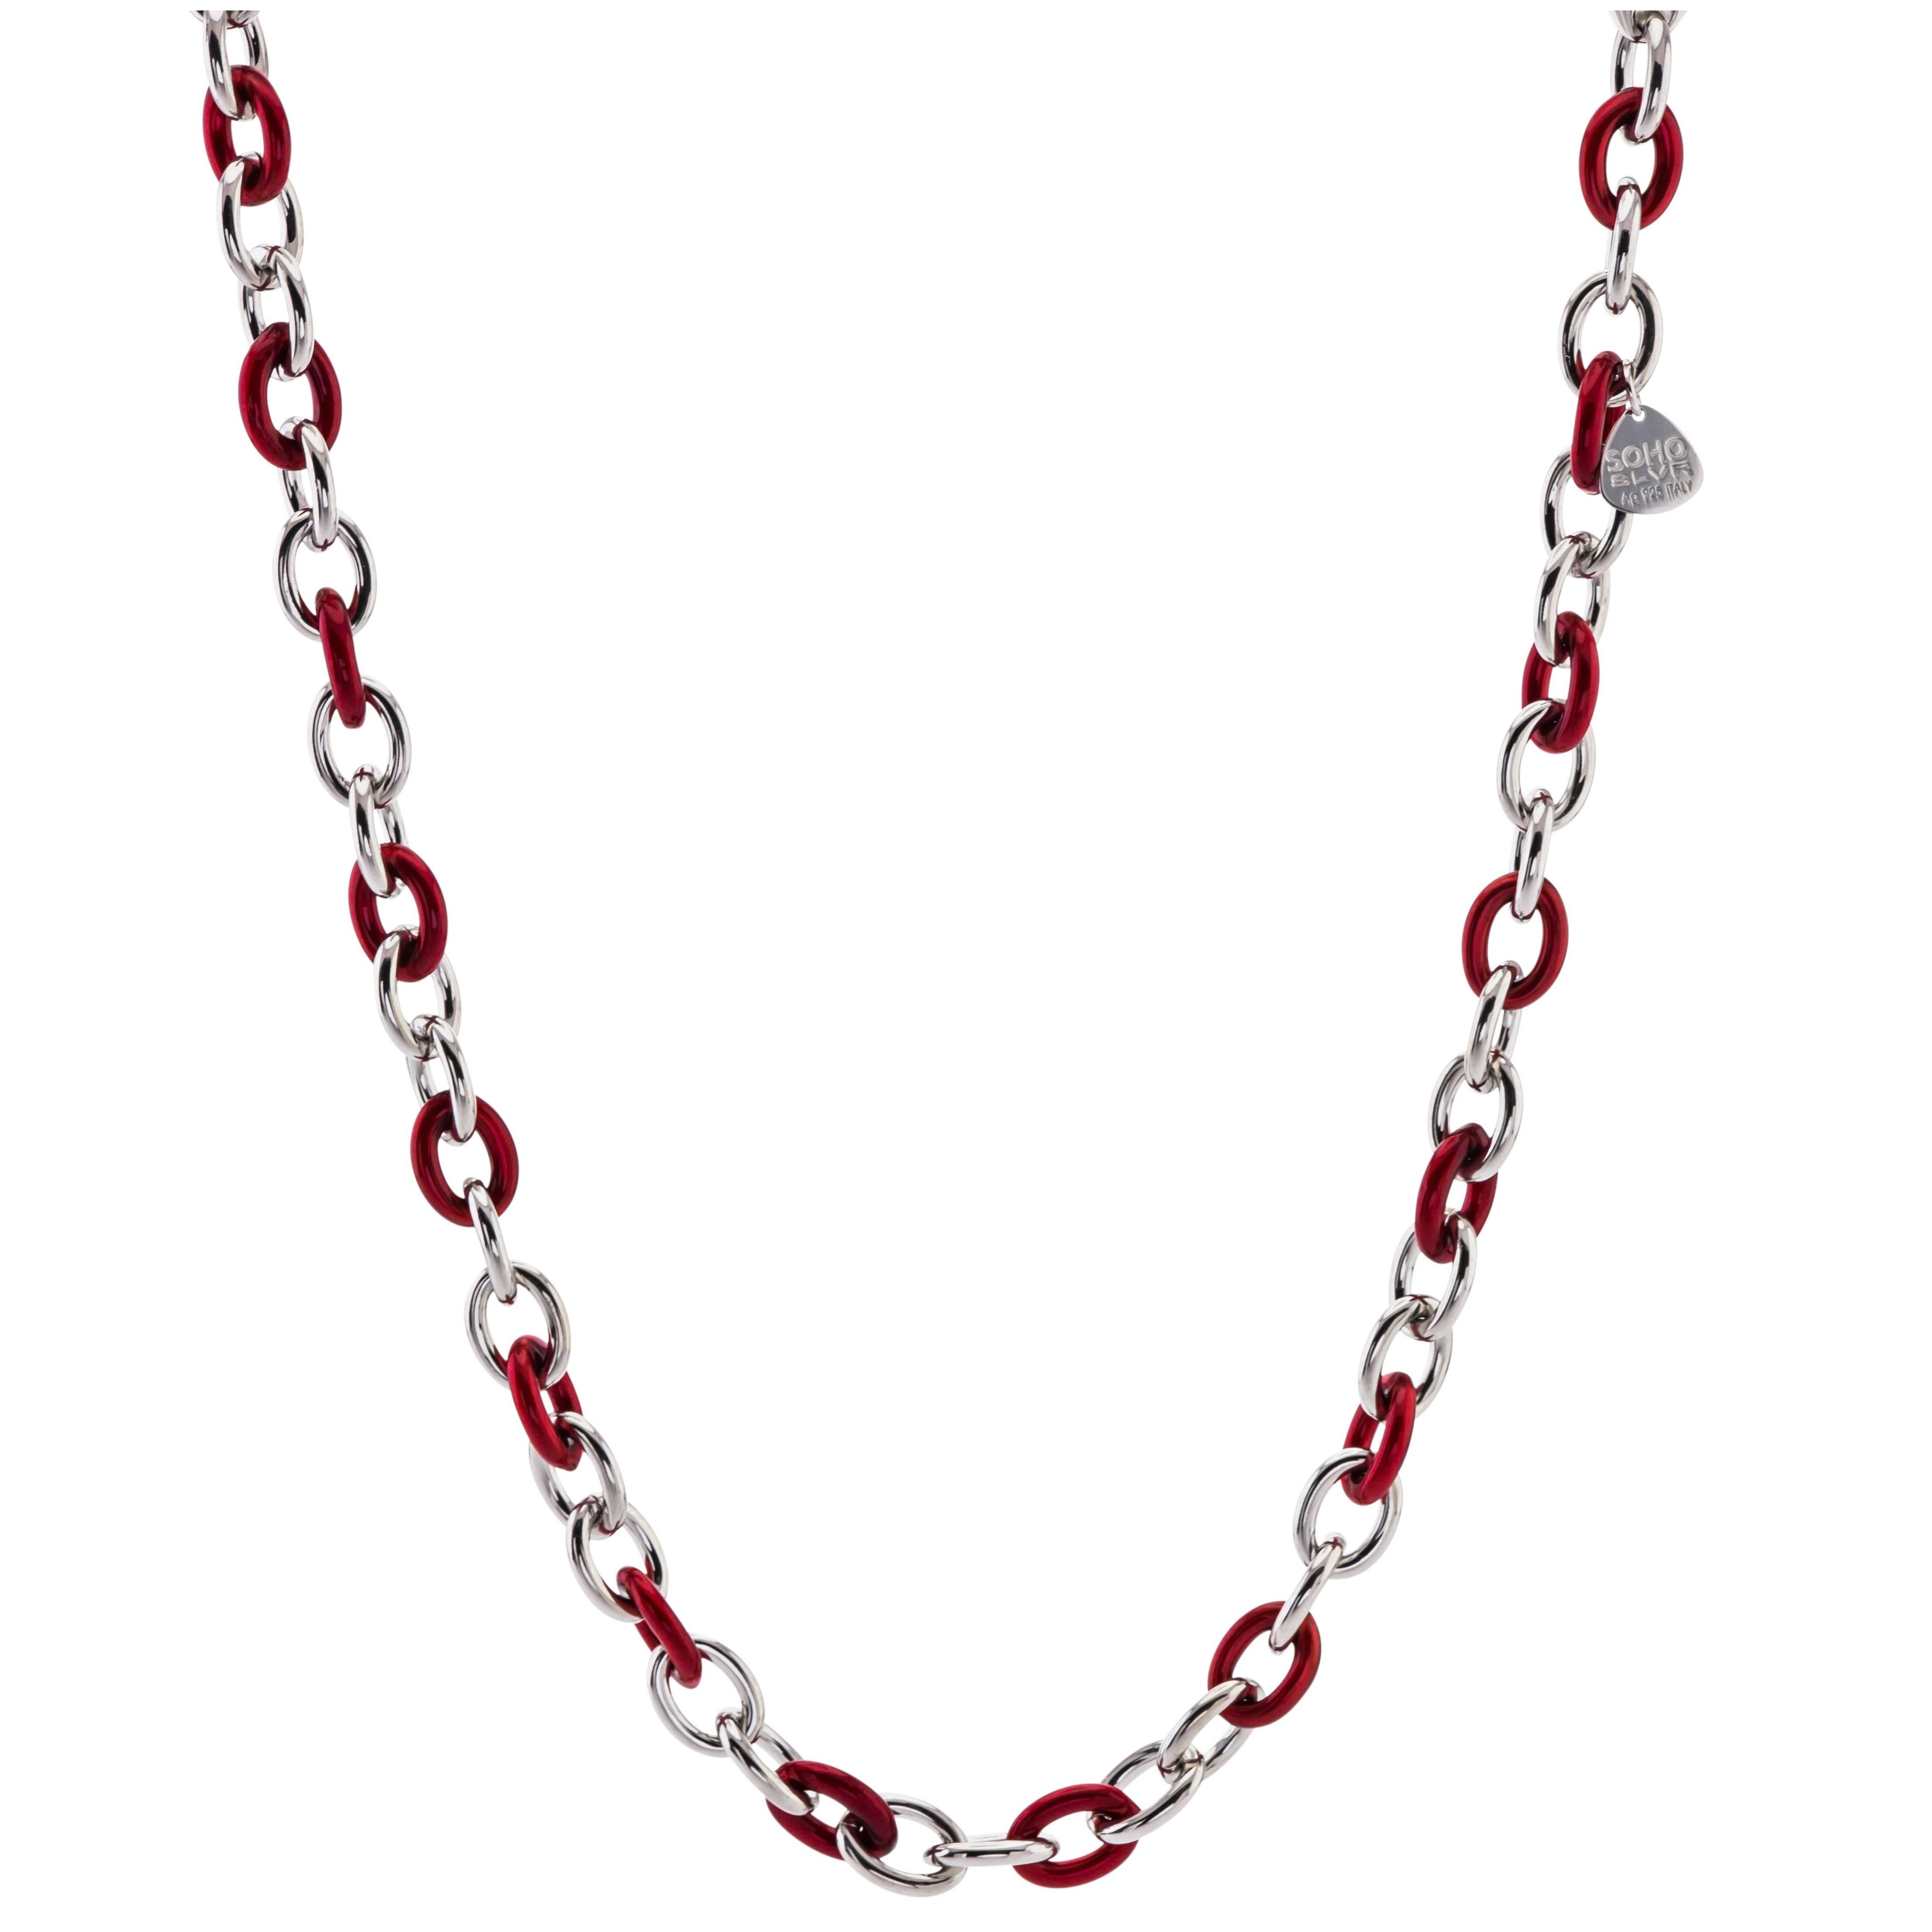 Italian Sterling Silver and Red Enamel Soho Link Necklace